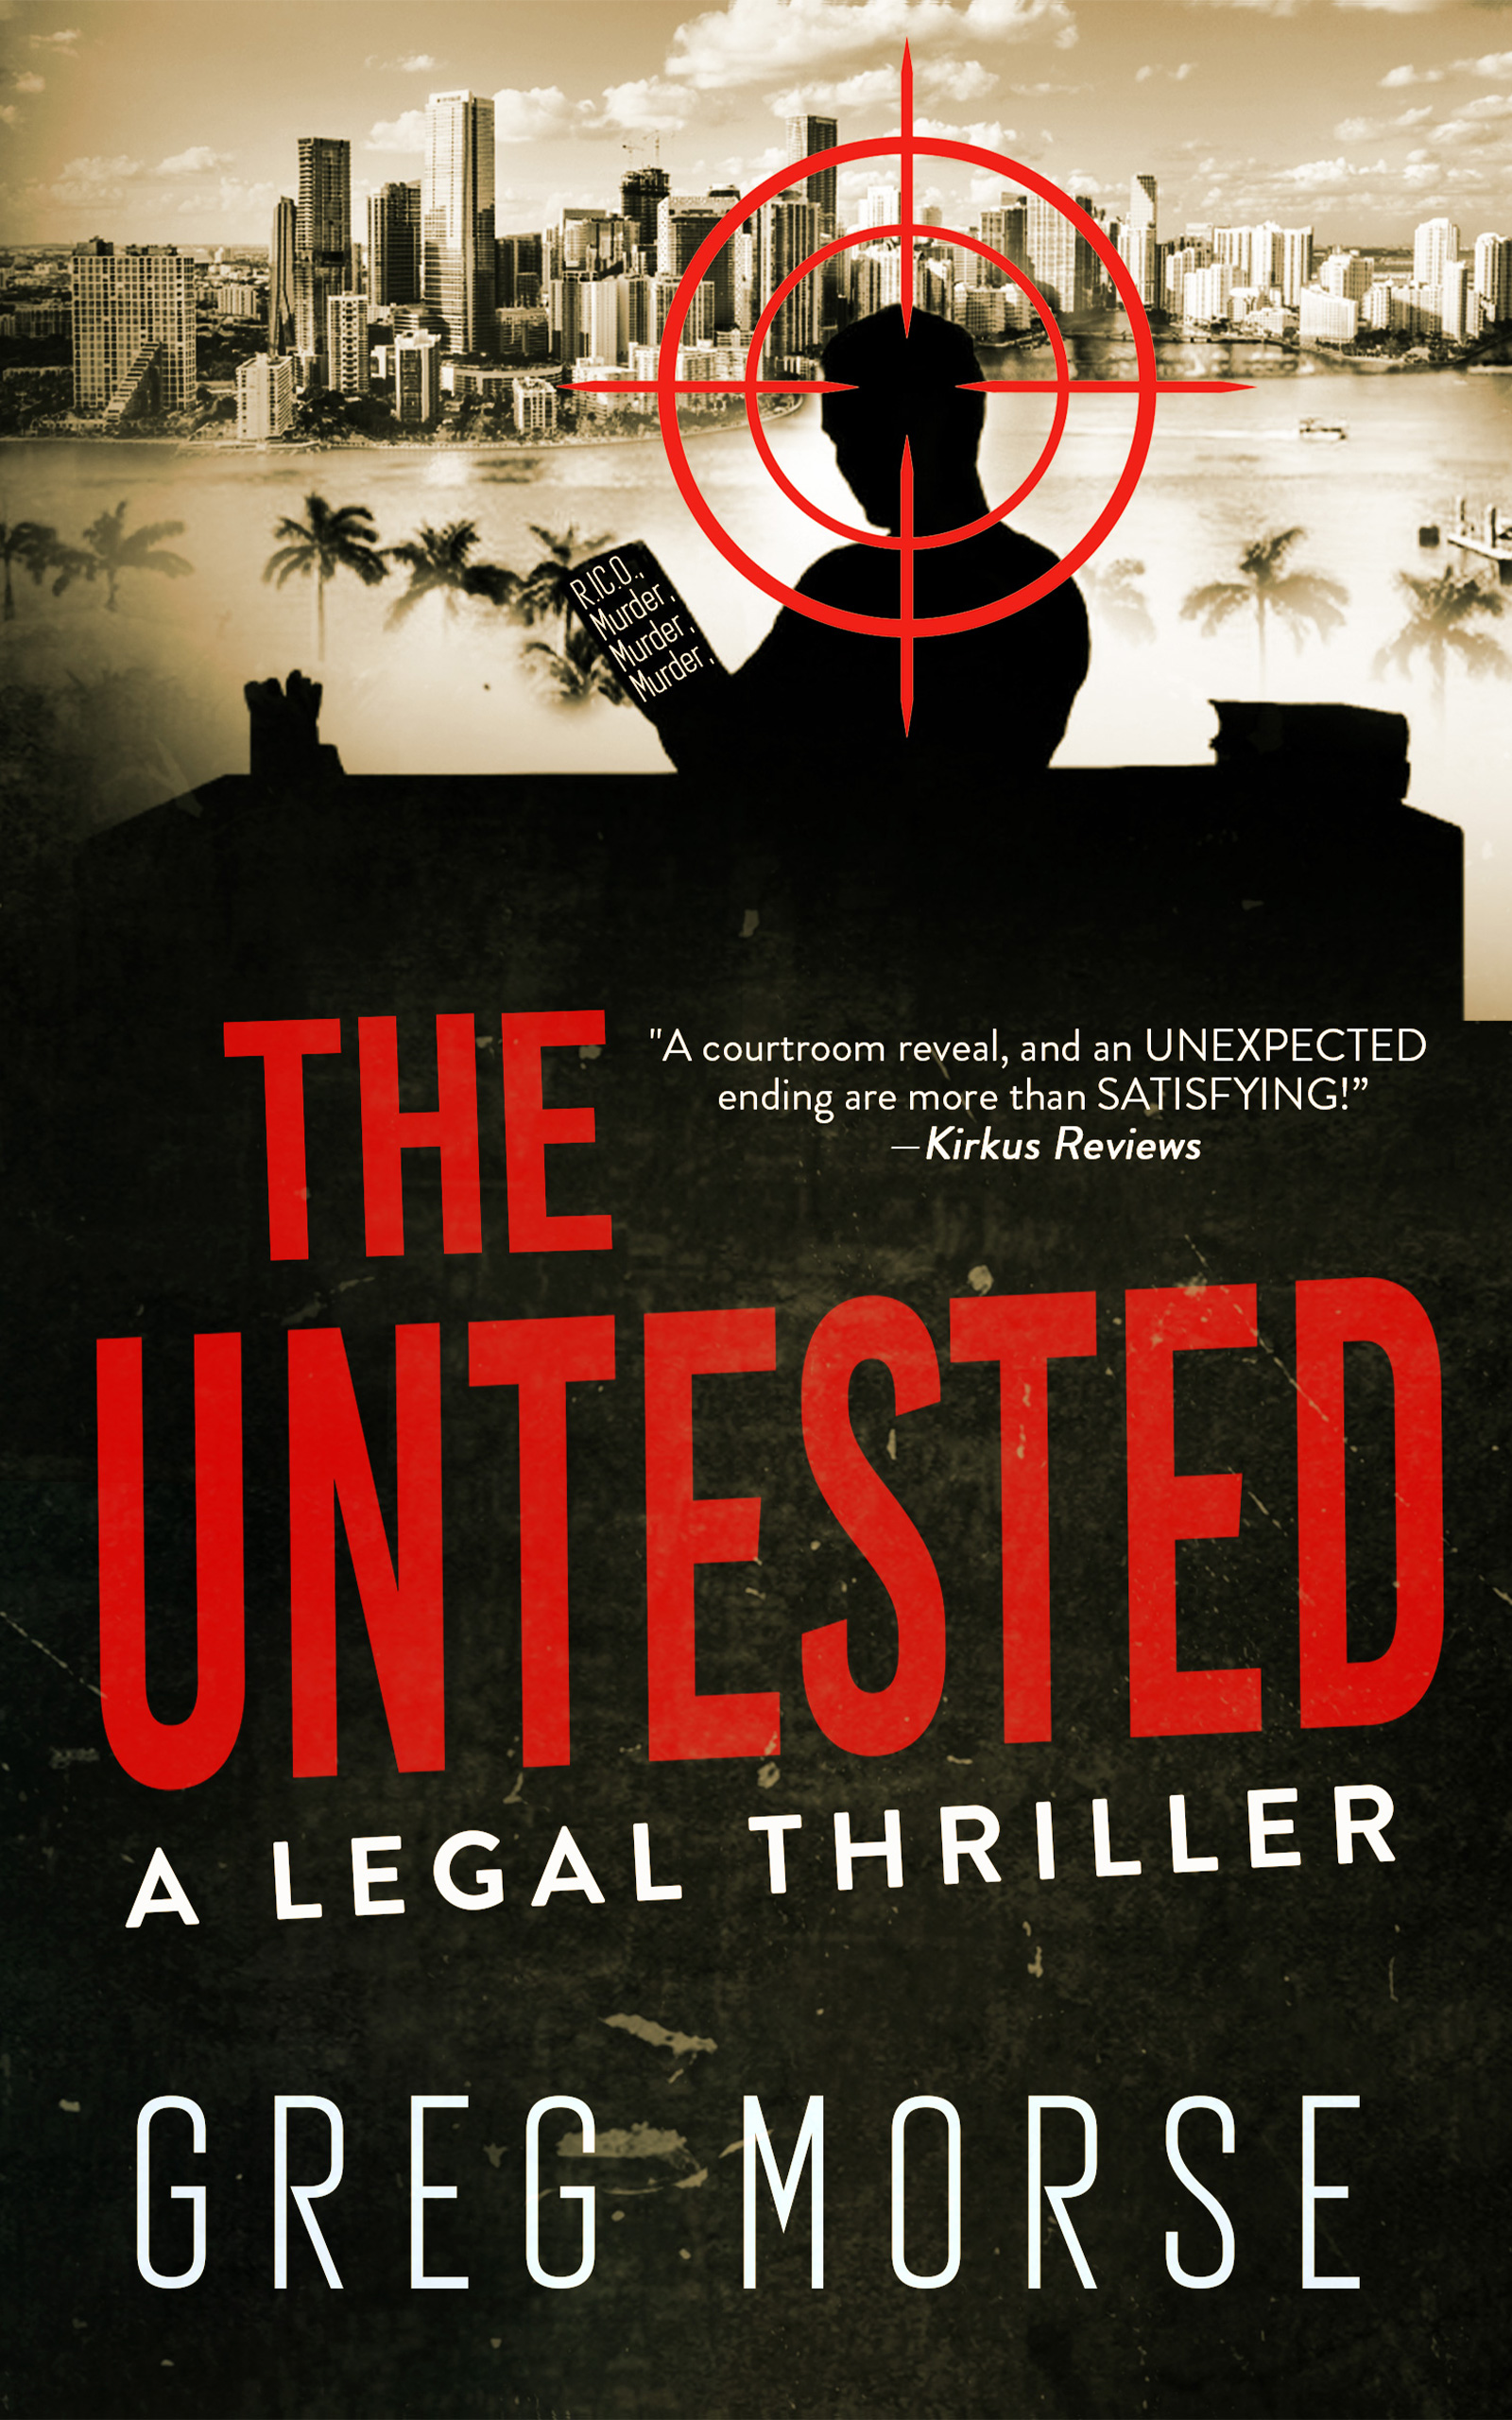 The untested